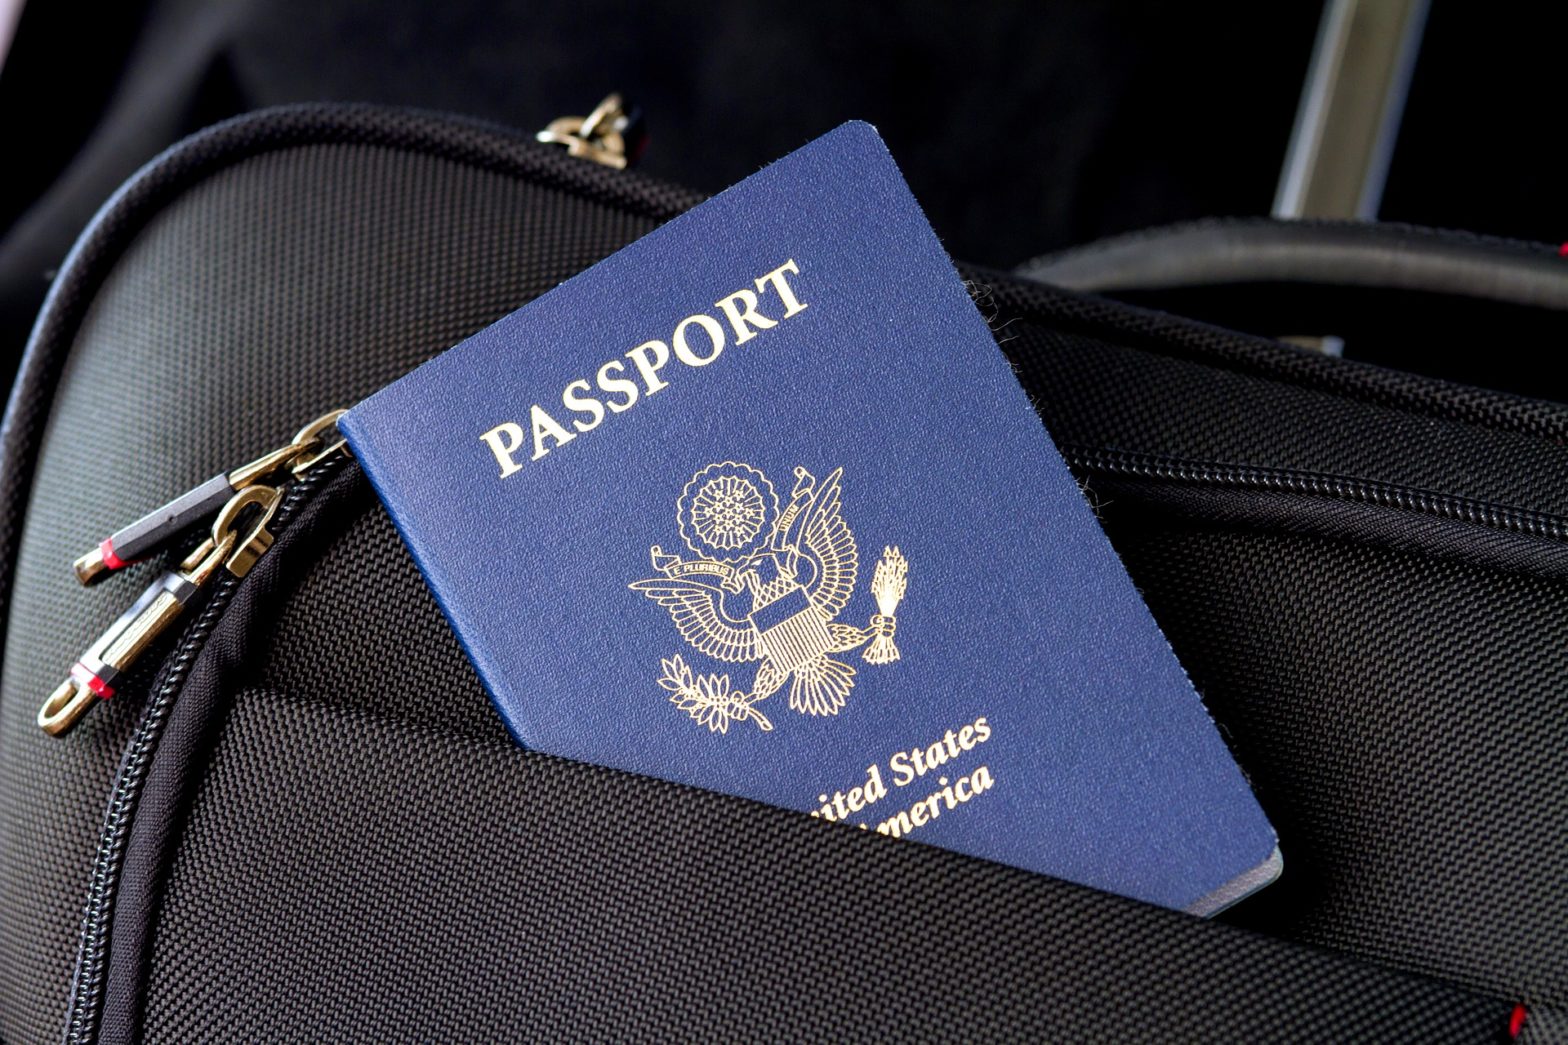 Passport Renewal Delays Cause Frustration for Summer Travelers